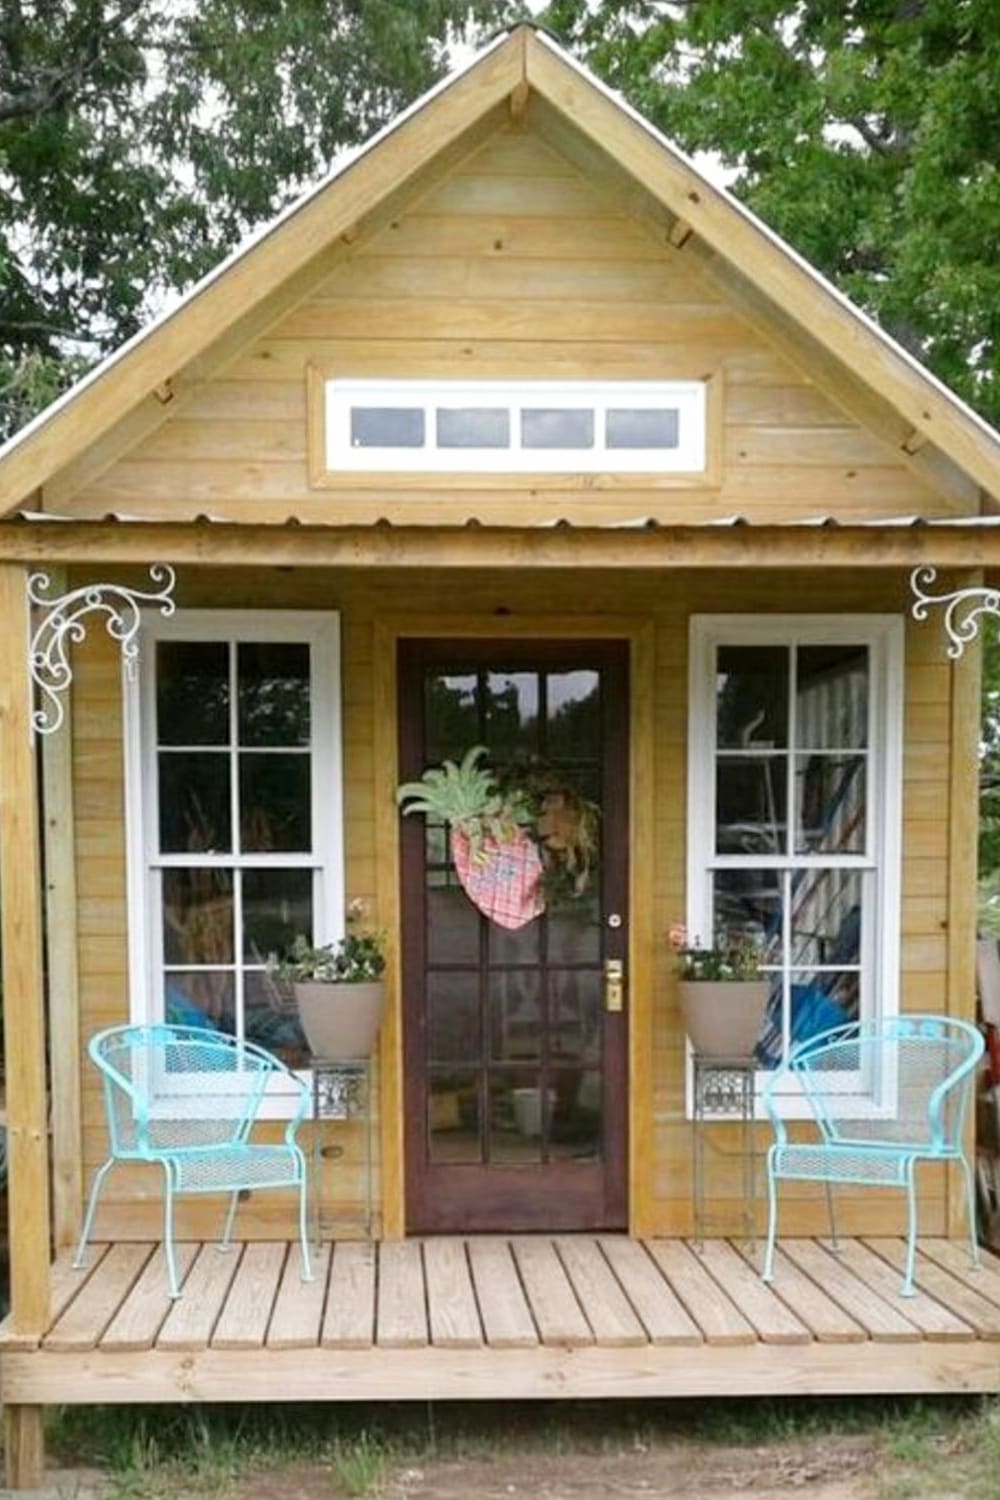 She Shed Ideas - Beautiful She Shed Ideas for a Backyard Retreat, Home Office or Craft Room - she sheds on a budget including she shed ideas interior - she shed ideas woman cave - She Shed Craft Room Ideas as well as she shed ideas interior craft rooms - beautiful DIY Backyard shed craft room ideas and shed office ideas! She Shed Pics, Images and Designs For The Perfect She Shed (or HE shed) - She Shed Cottage Office Ideas Pictures too!